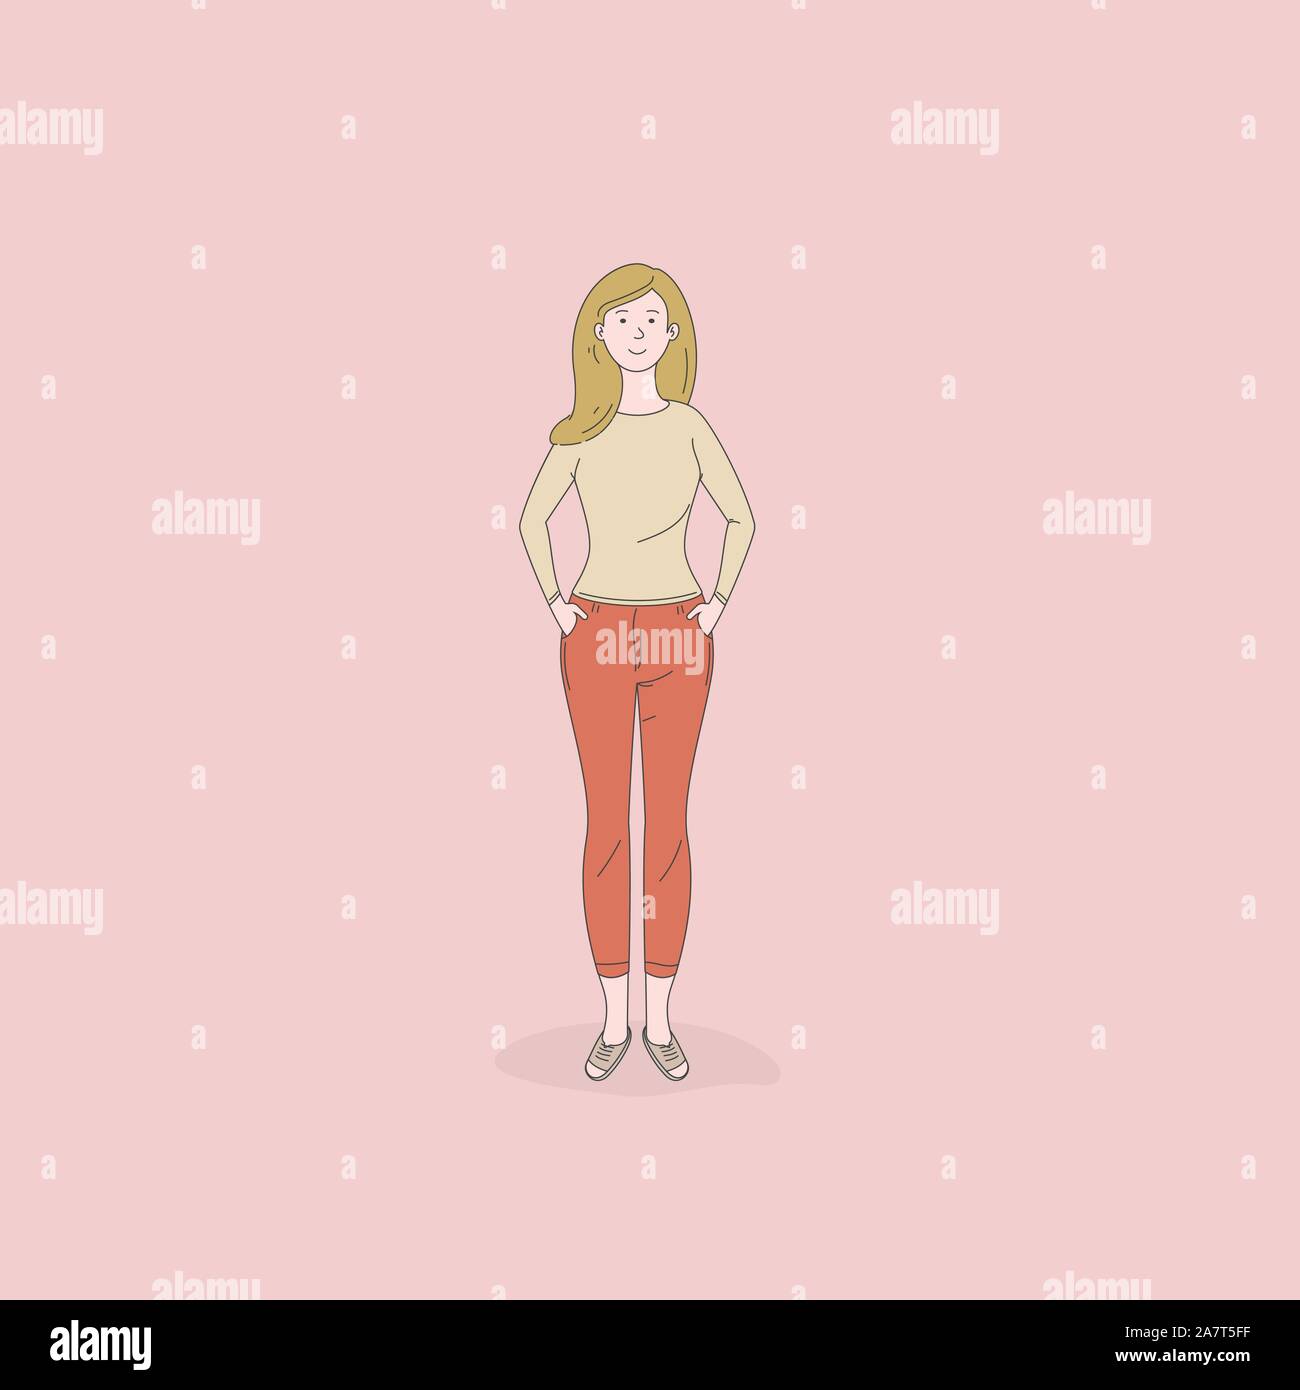 Cute woman standing poses isolated on background.Lifestyle concepts.Vector design illustrations. Stock Vector